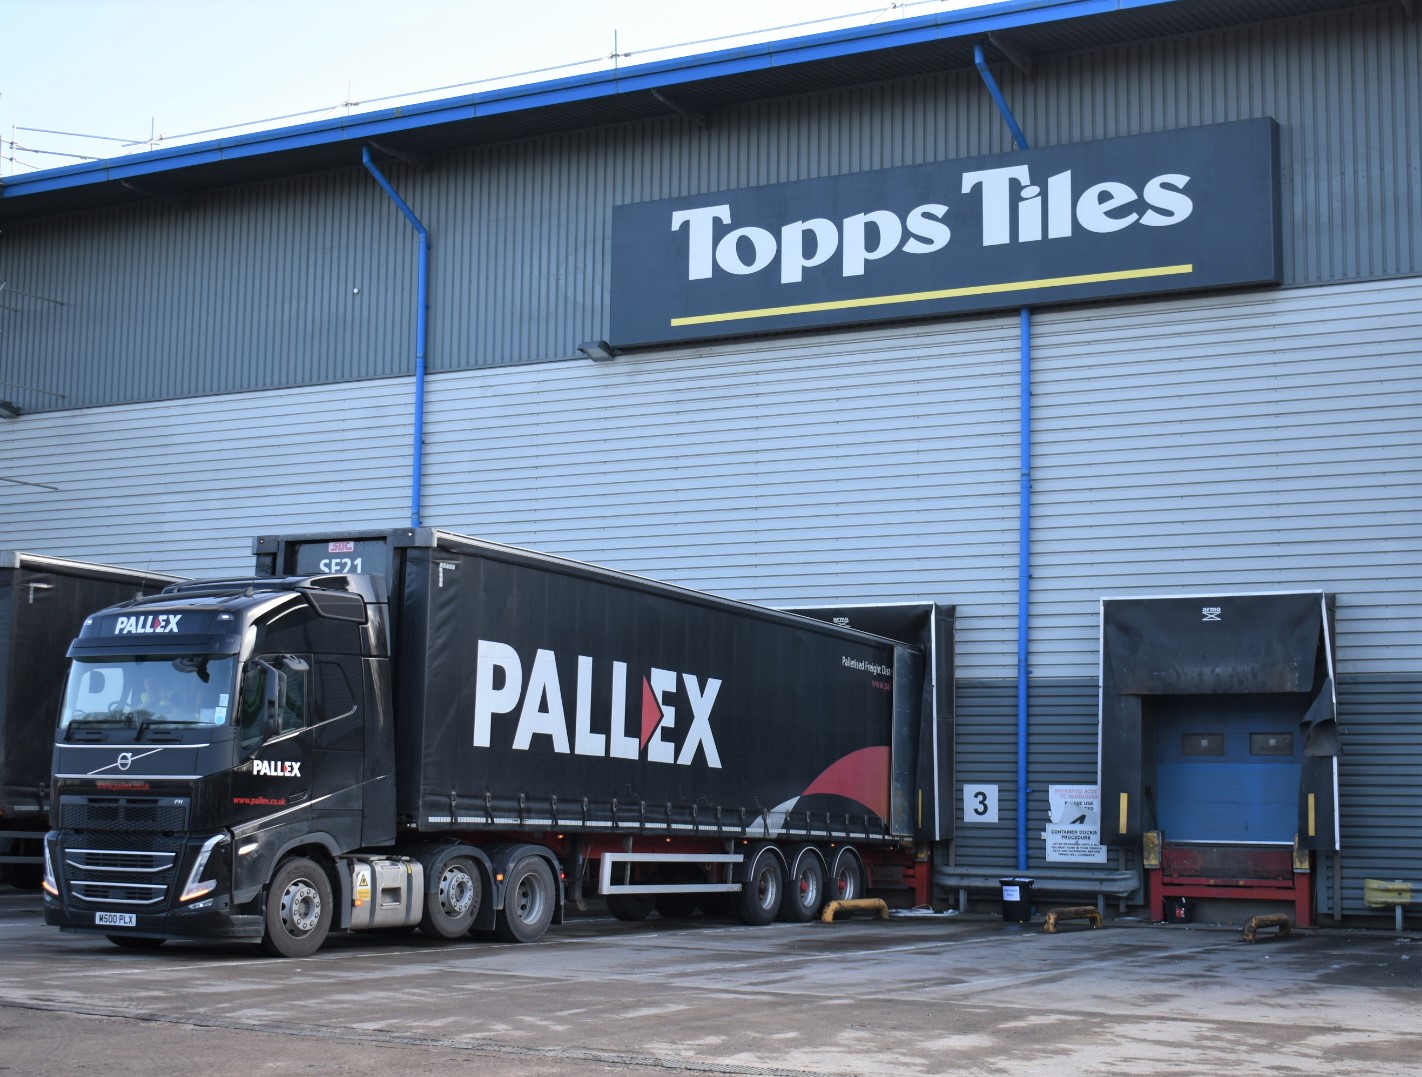 Topps Tiles renews distribution contract with Pall-Ex